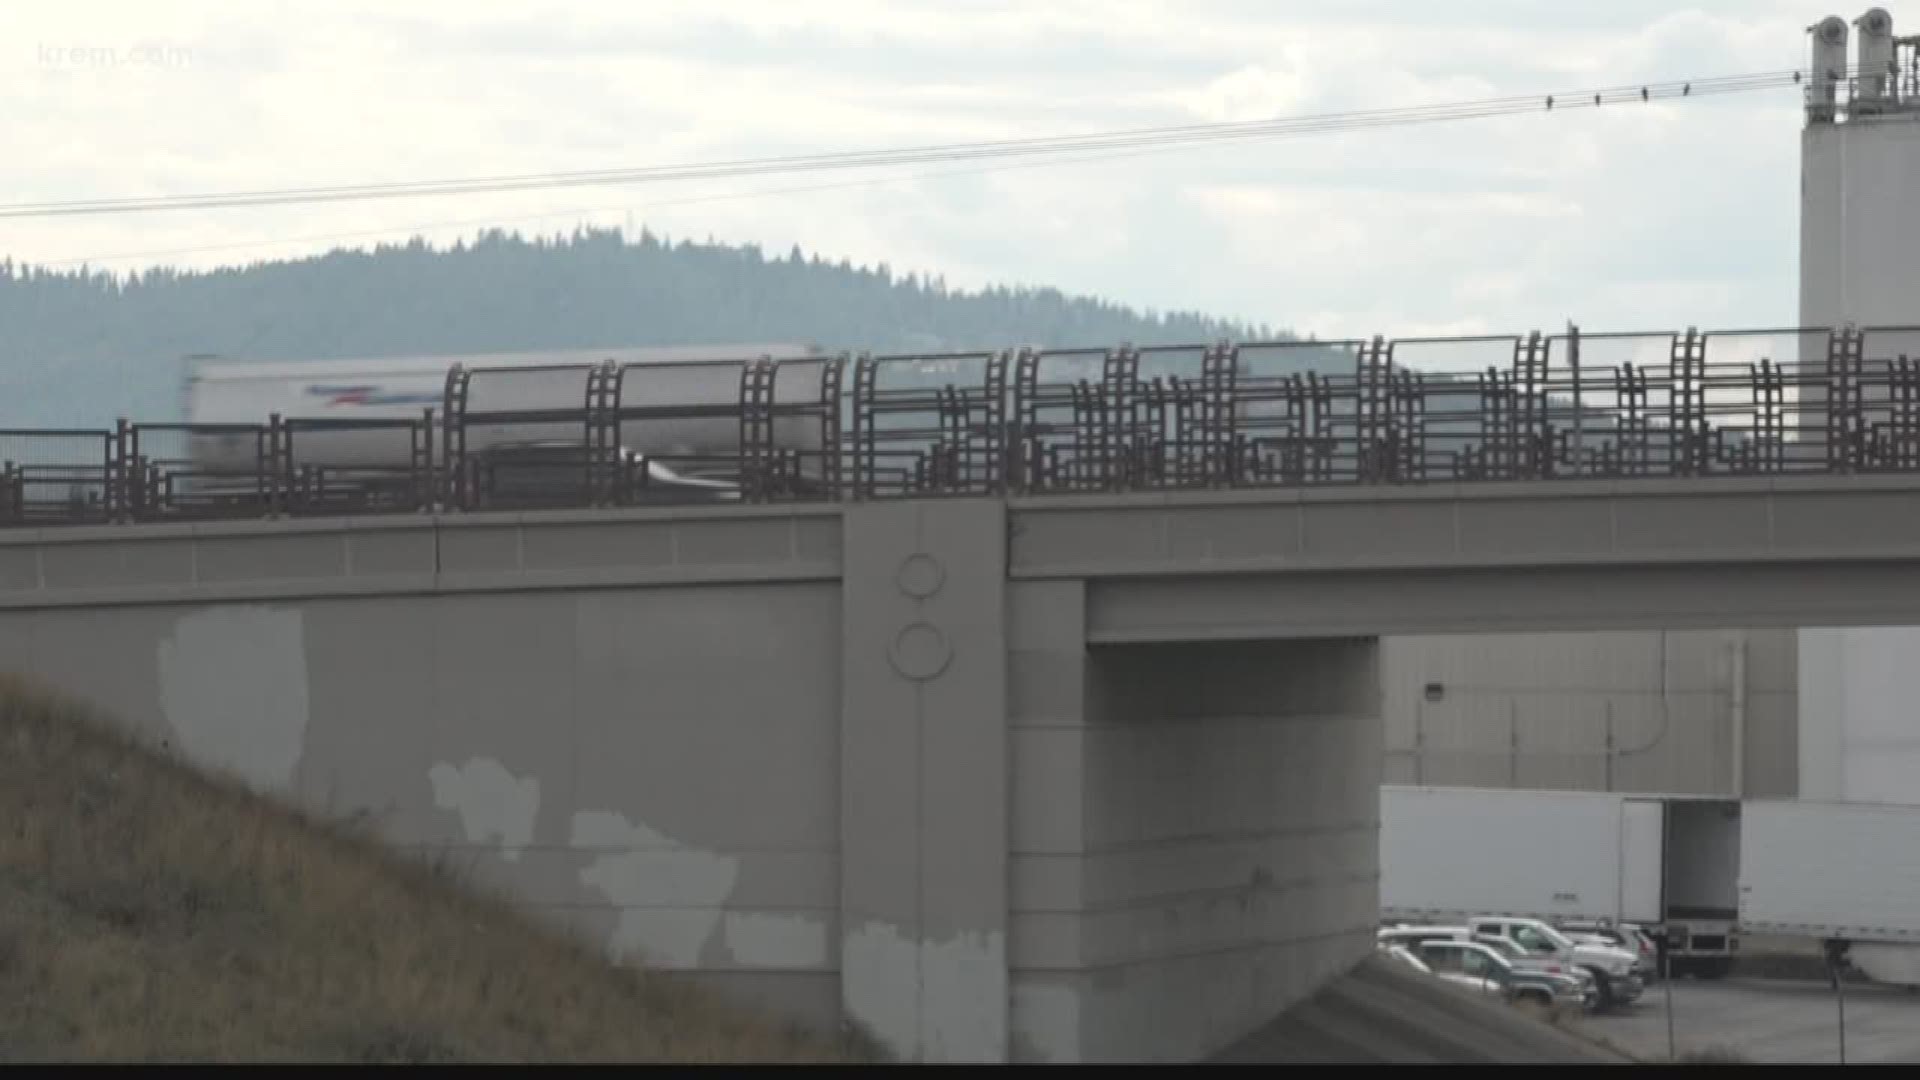 WSDOT still has a long way to go to connect the freeway to I-90, known as the North-South Corridor. KREM 2's Tim Pham updates us on the progress.